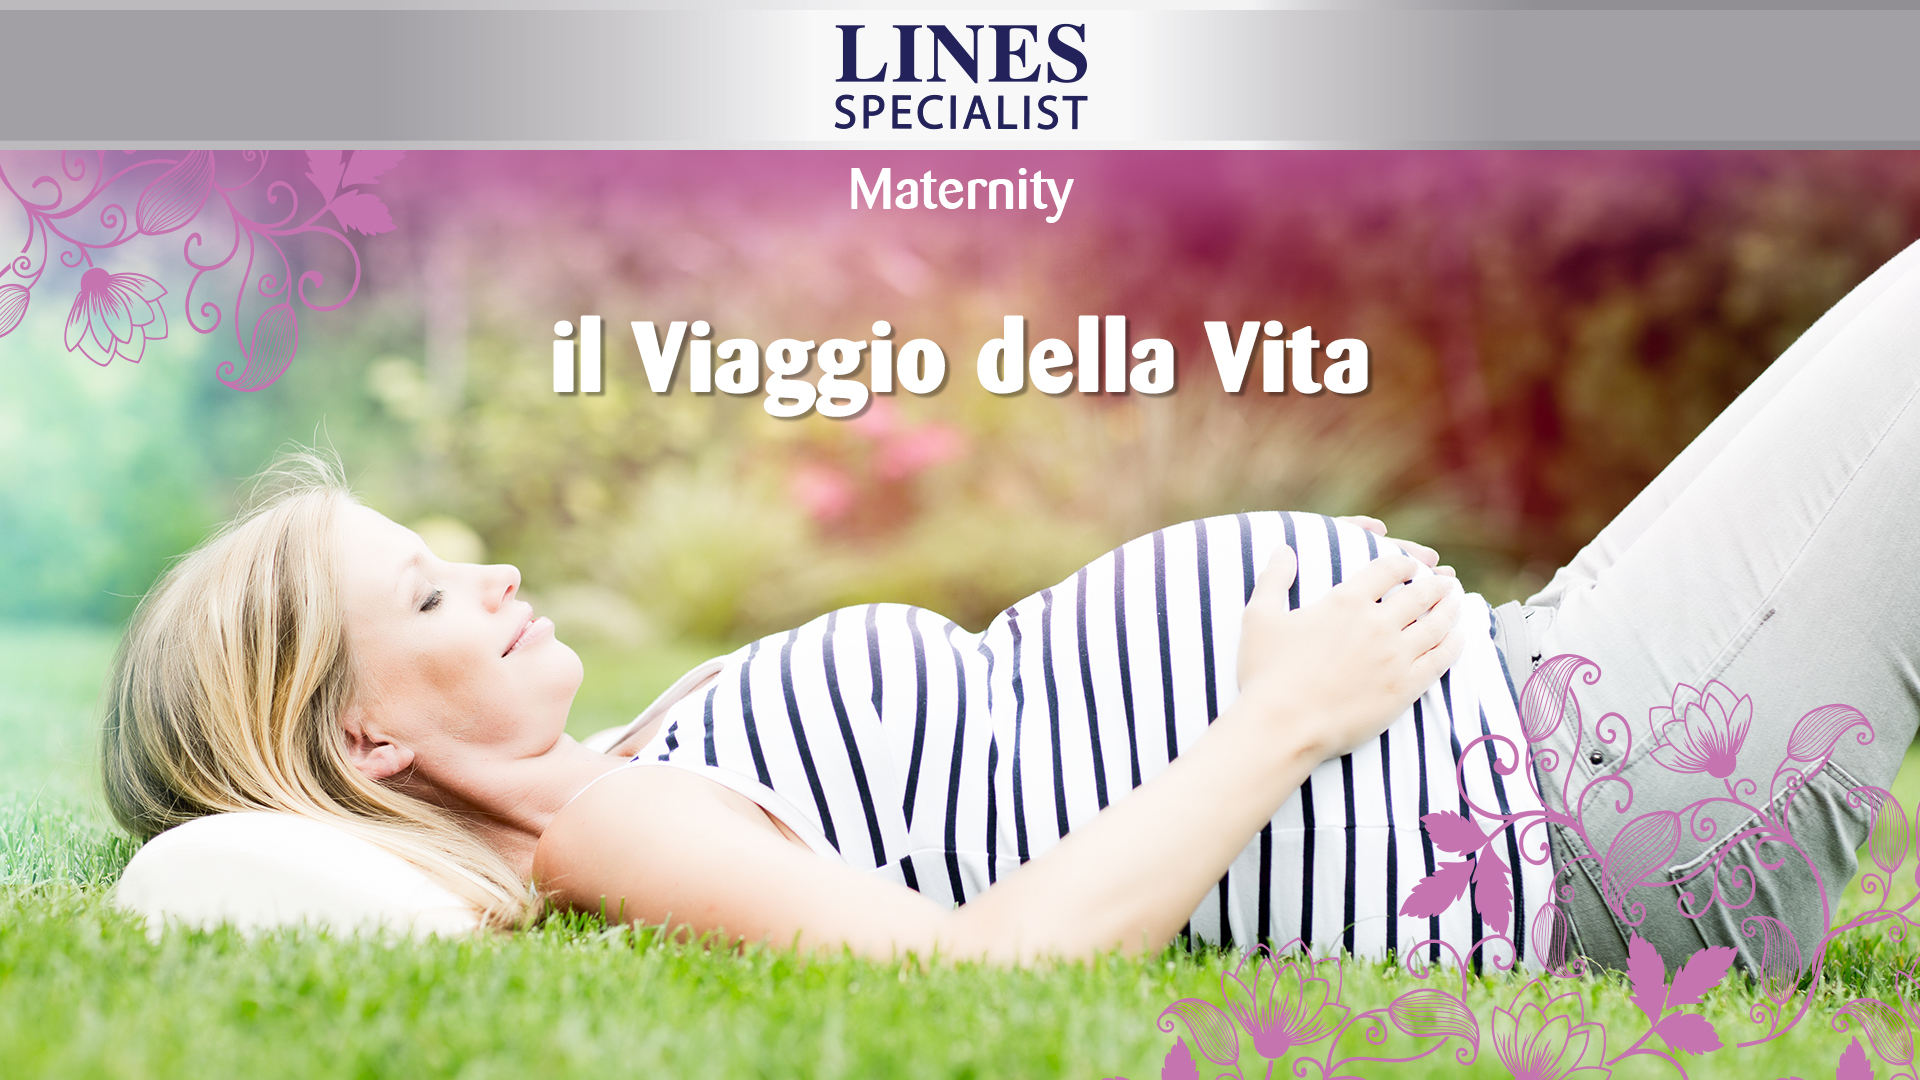 LINES Specialist Maternity